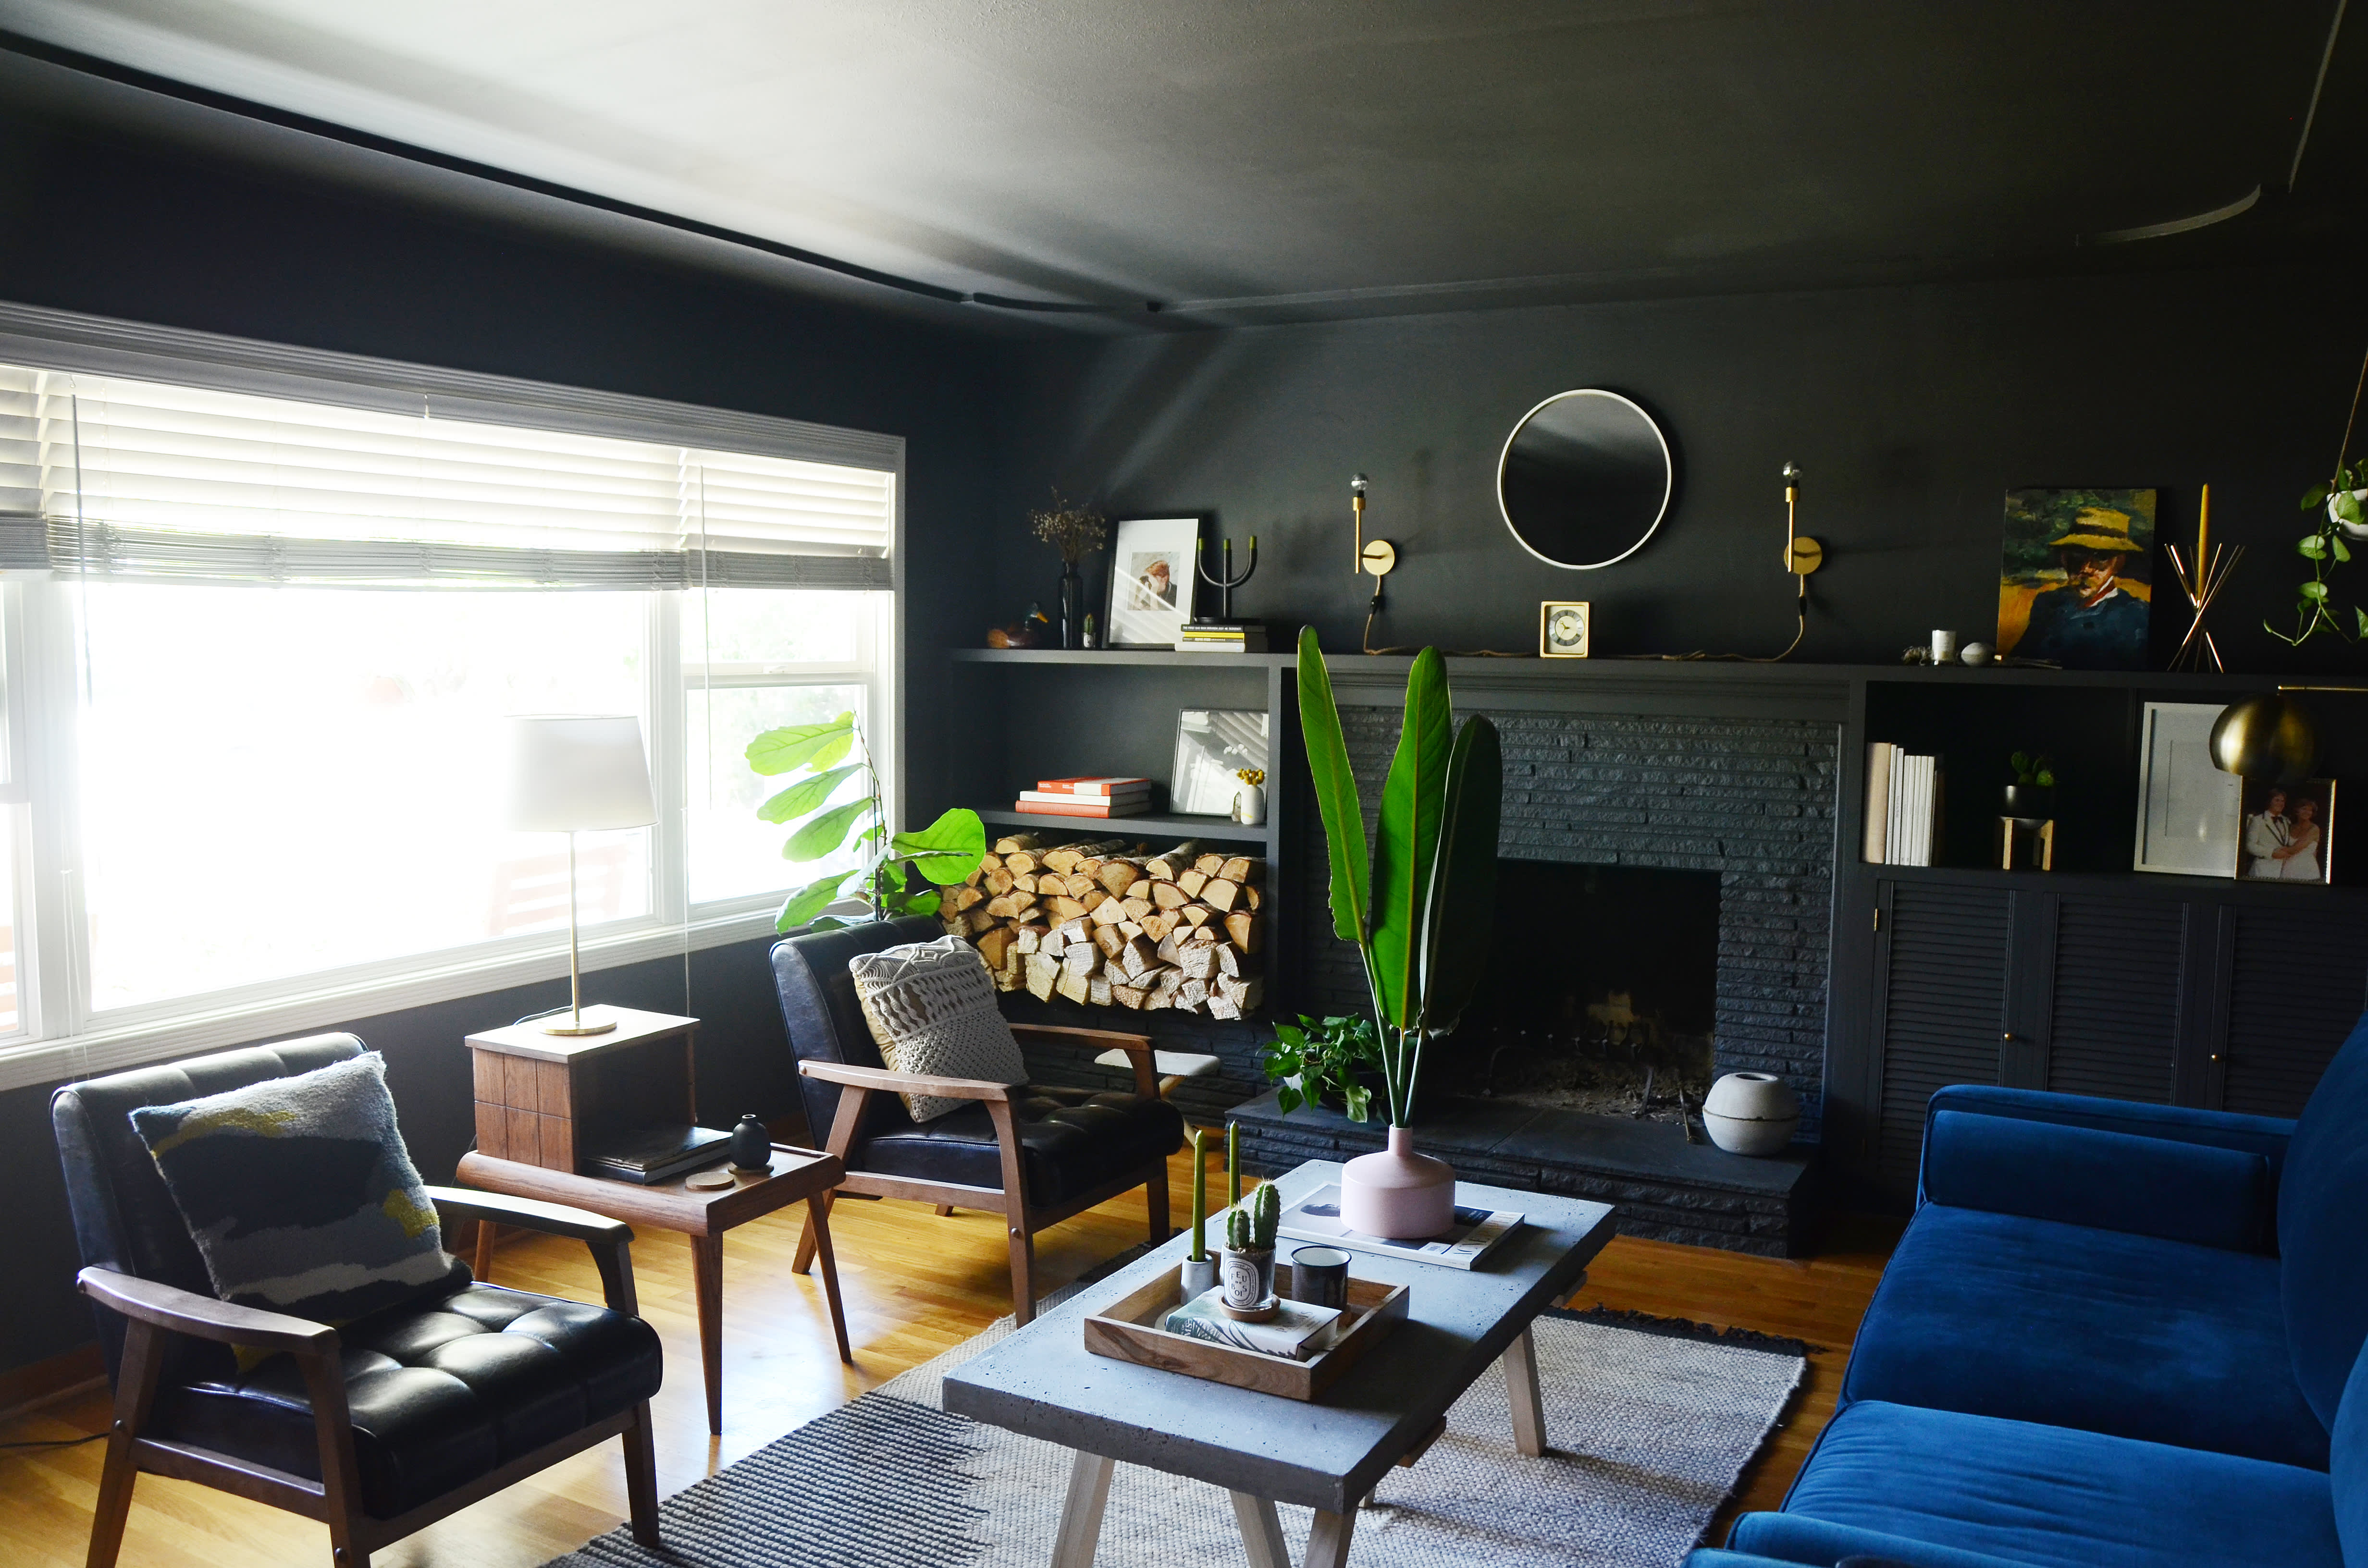 How To Use Black Paint In Your Home, According To The Experts